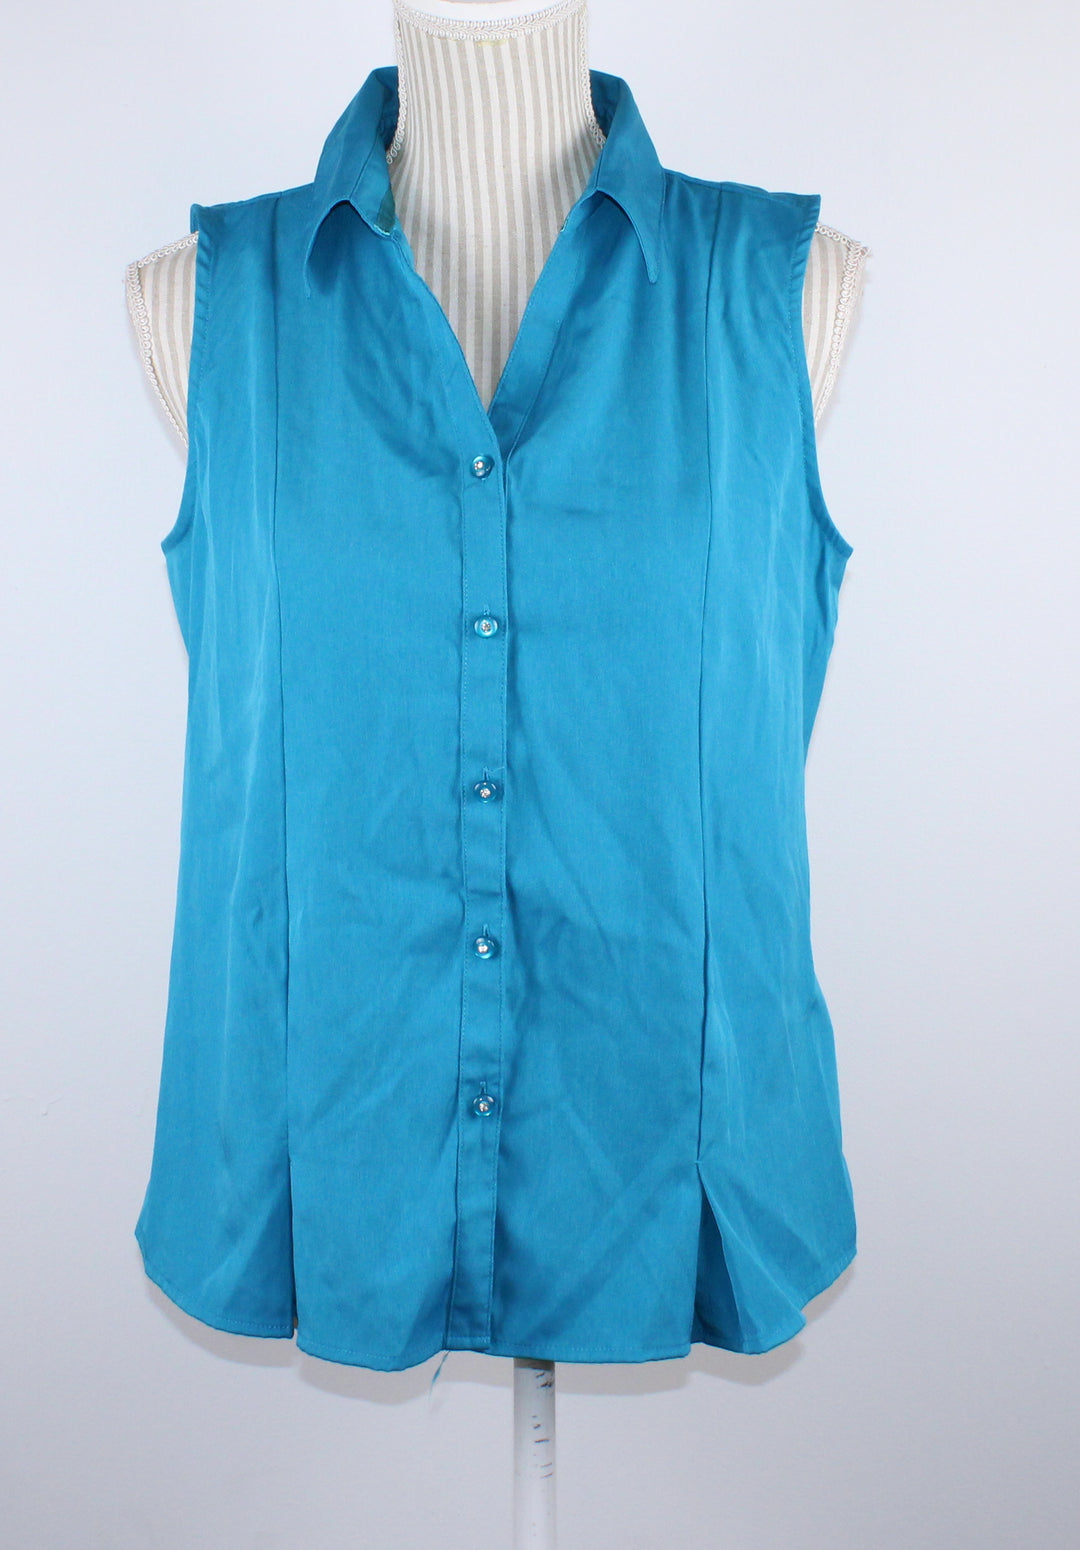 TRADITIONS STRETCH  BLUE SLEEVELESS TOP LADIES SIZE 8 EUC